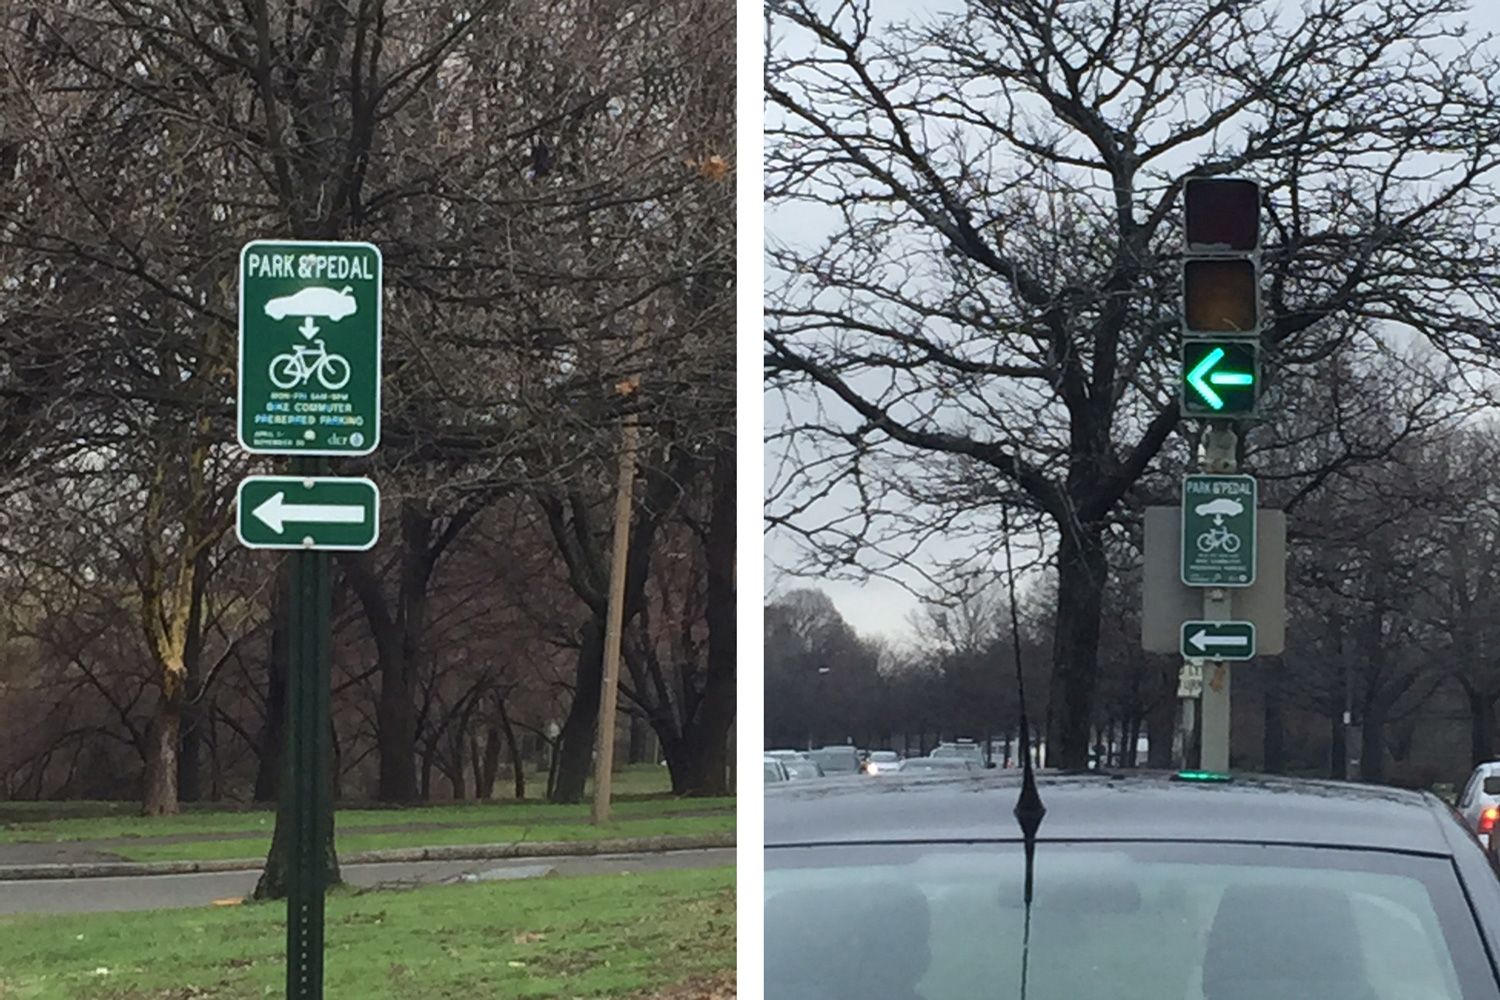 Herter Park&Pedal Signs early 2015